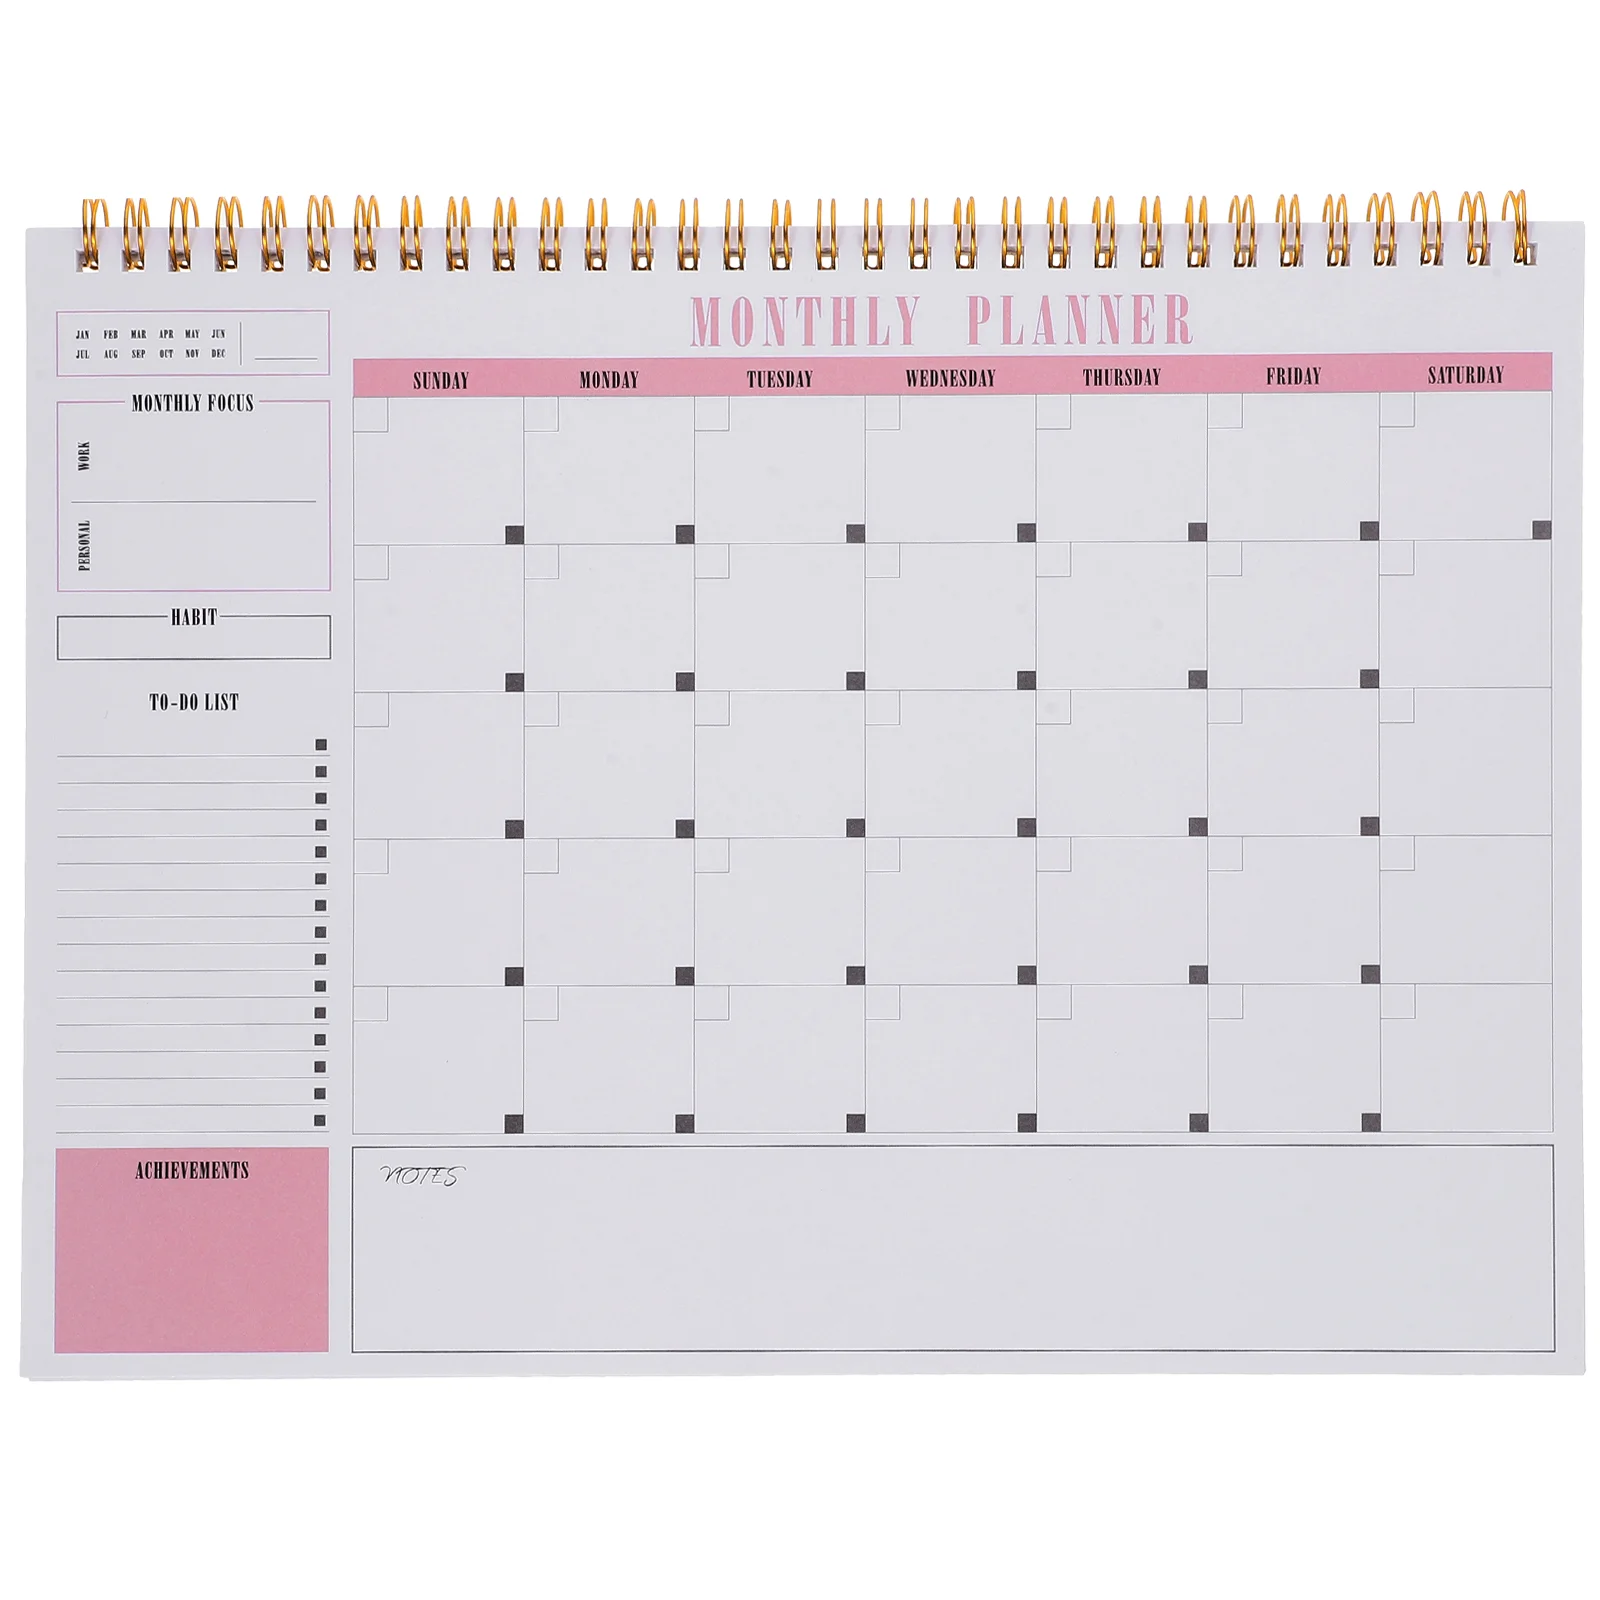 Daily Planner Notepads Schedule Planner Notepad To Do List Tear Off Memo Writing Notebook Organizer Work Home Office School